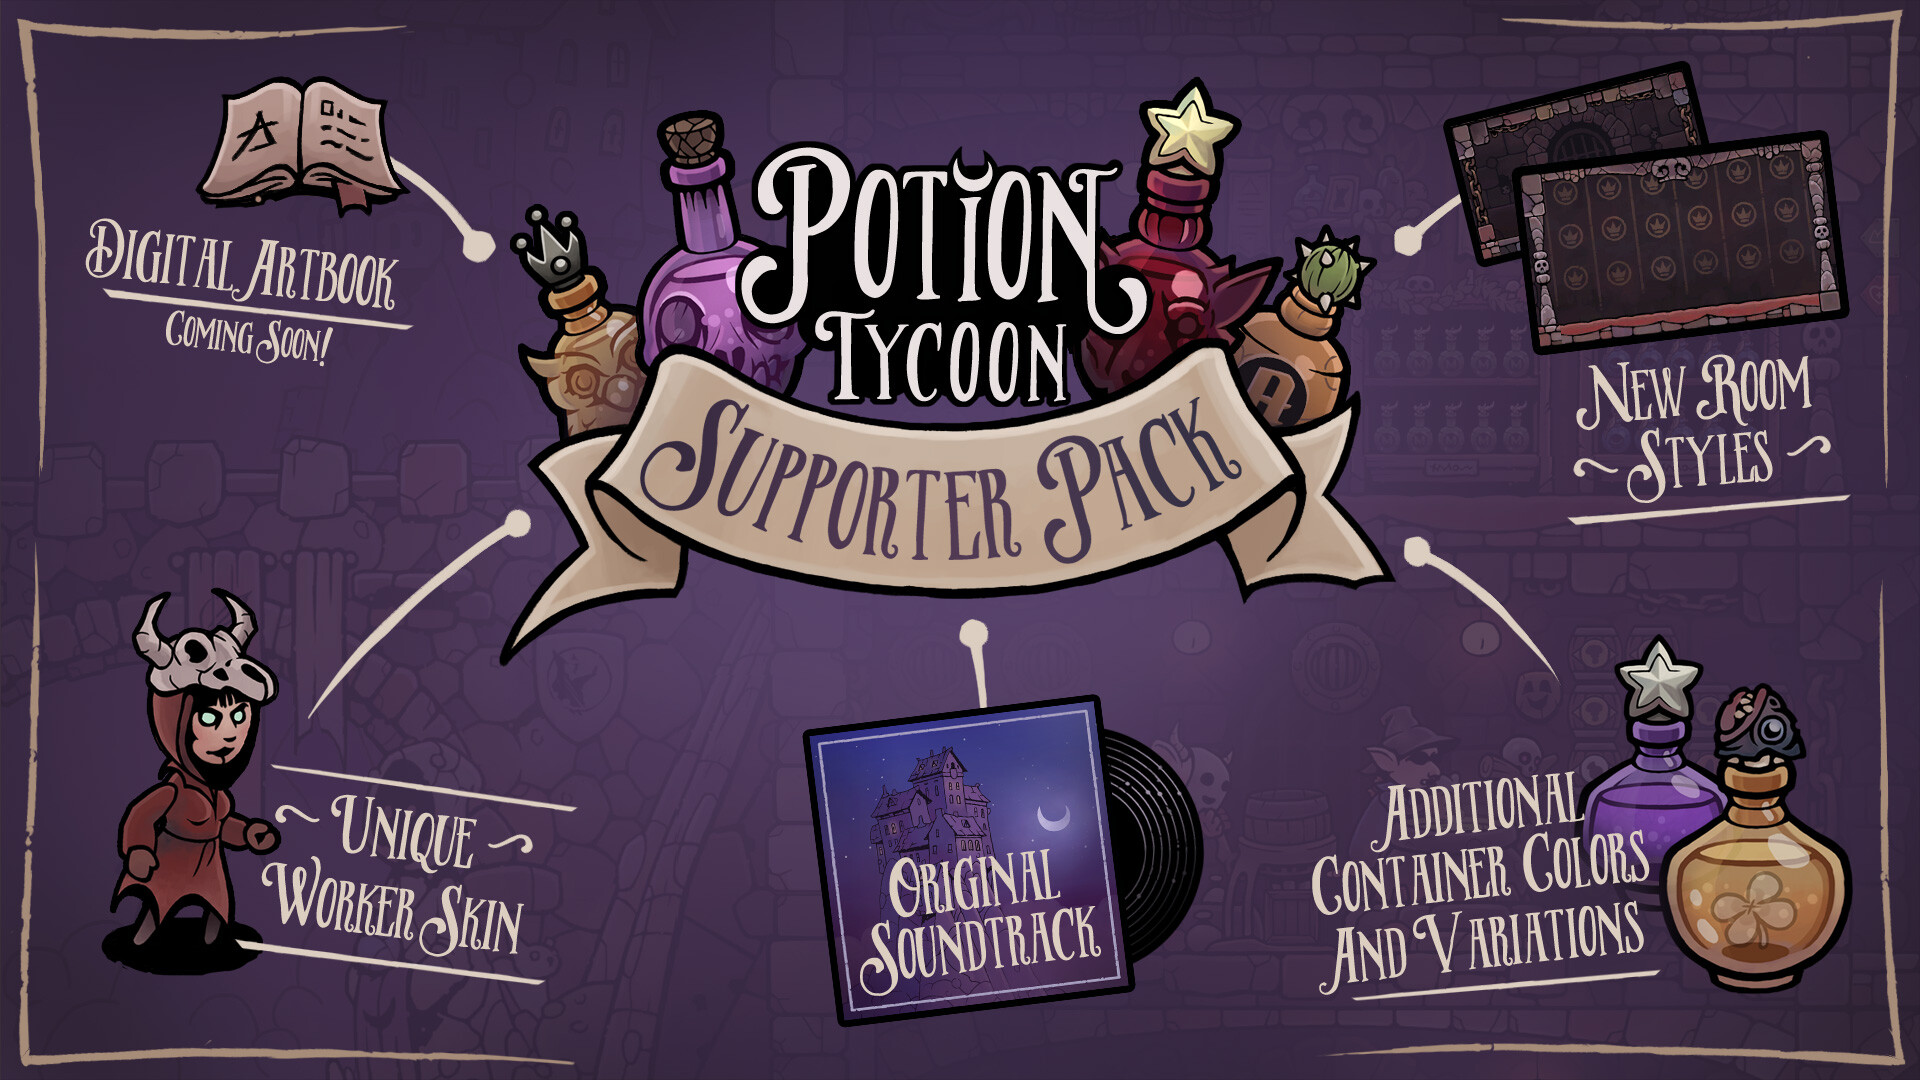 [$ 7.88] Potion Tycoon - Supporter Pack DLC Steam CD Key